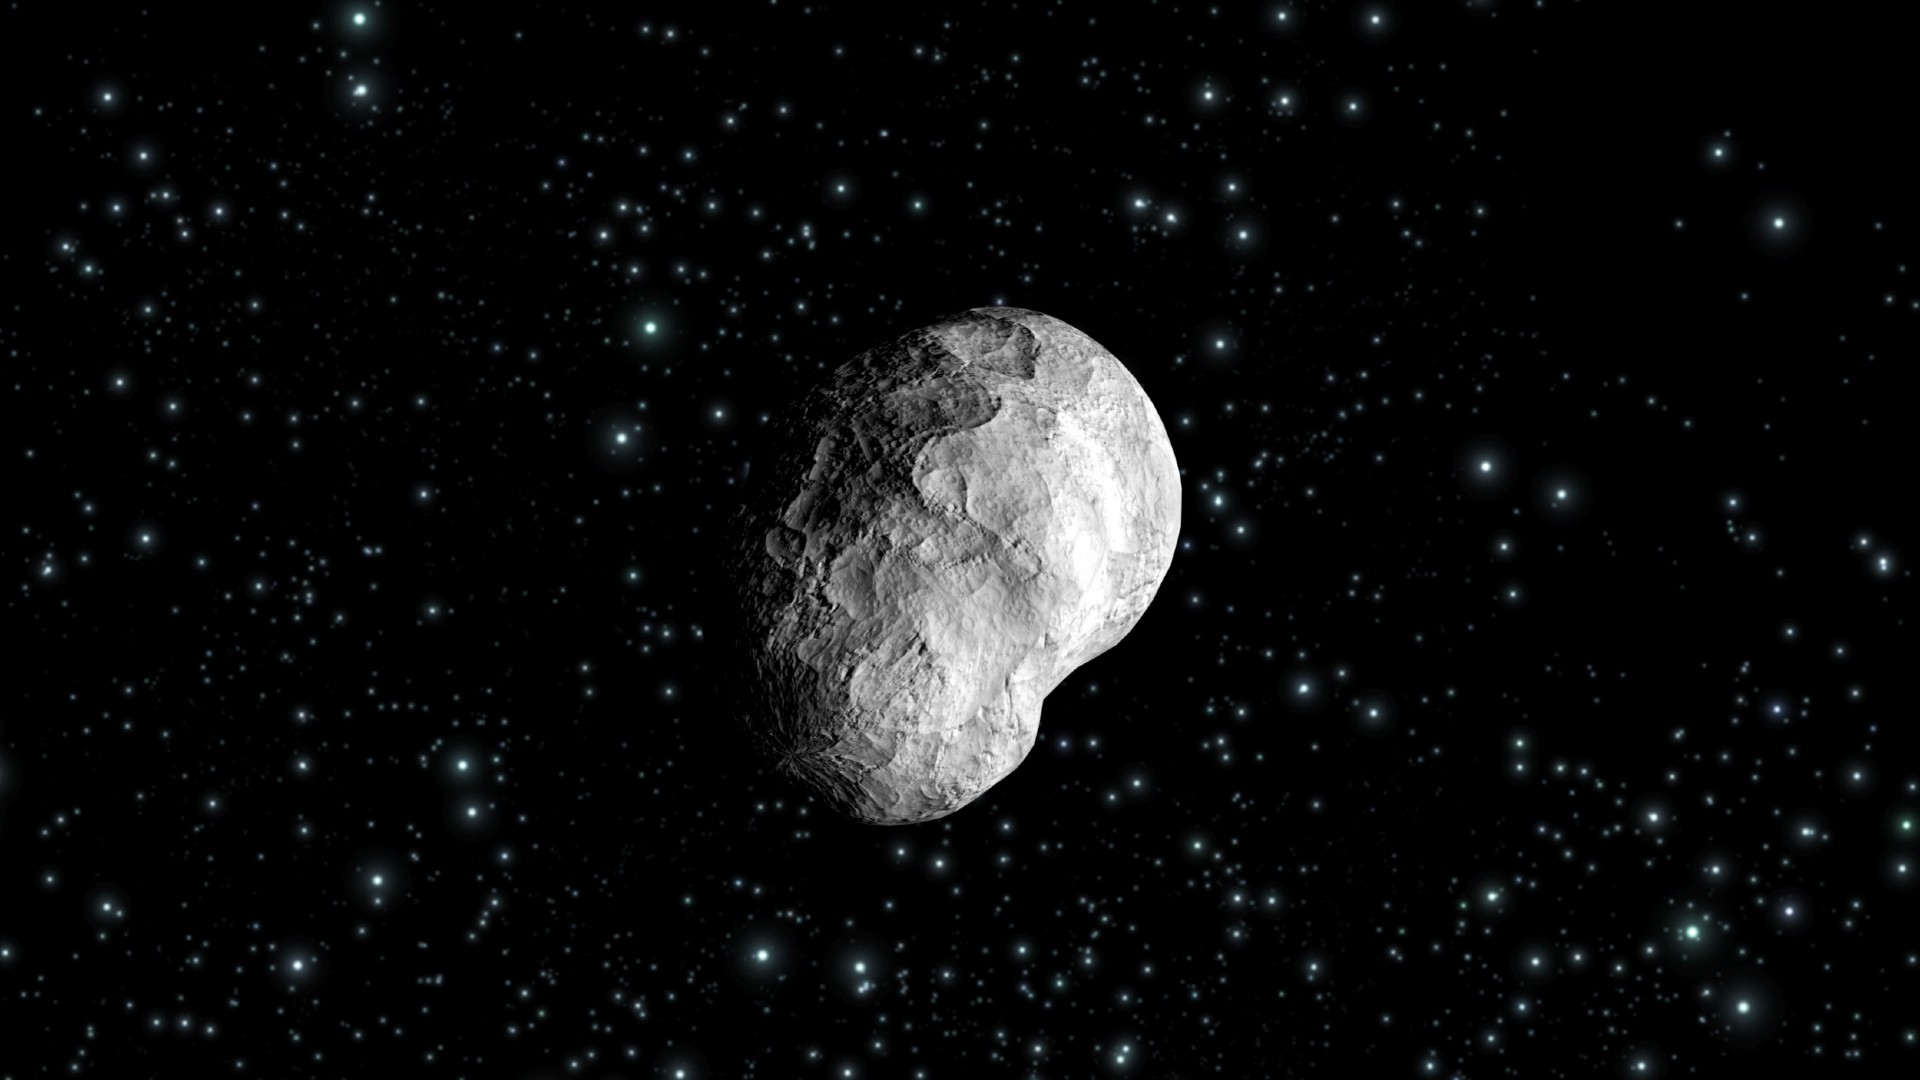 Amateur astronomers challenged to spot an asteroid for Christmas